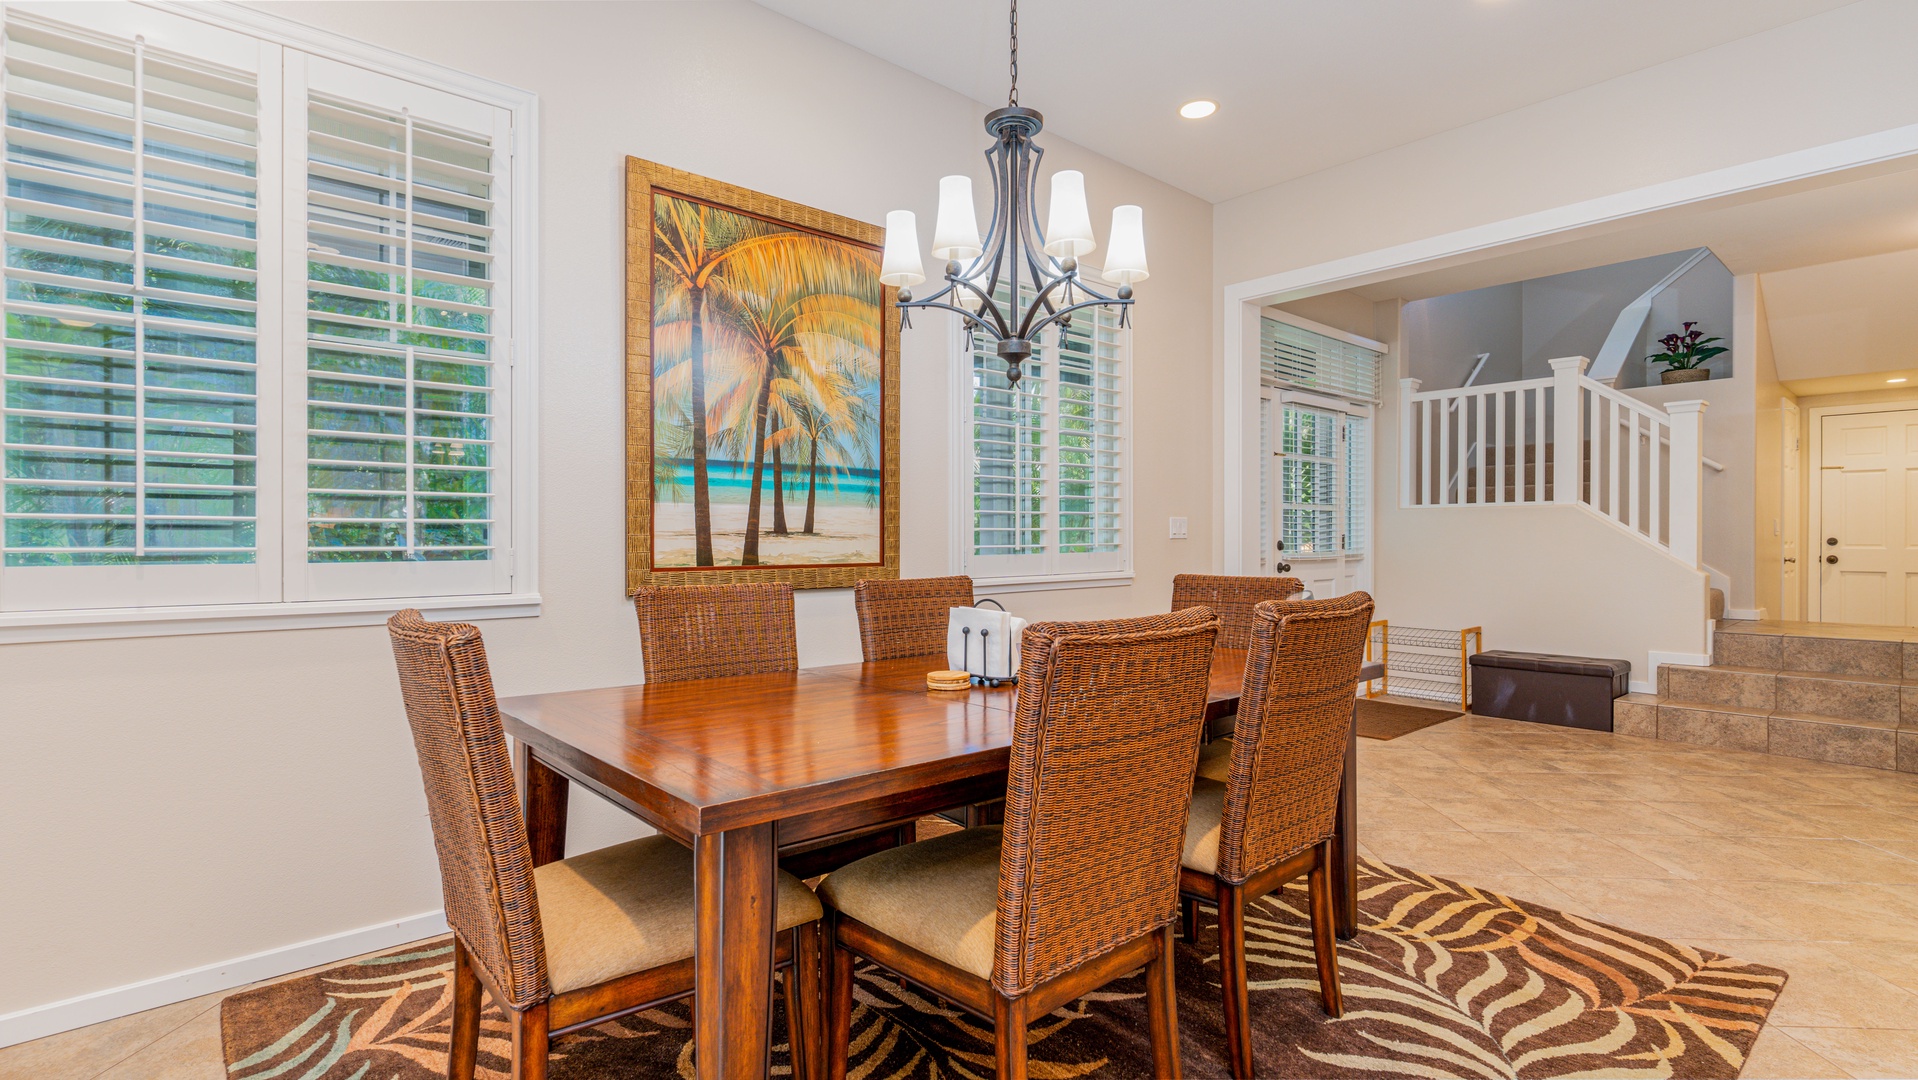 Kapolei Vacation Rentals, Coconut Plantation 1234-2 - Bring on game night at the table and make memories to last a lifetime.